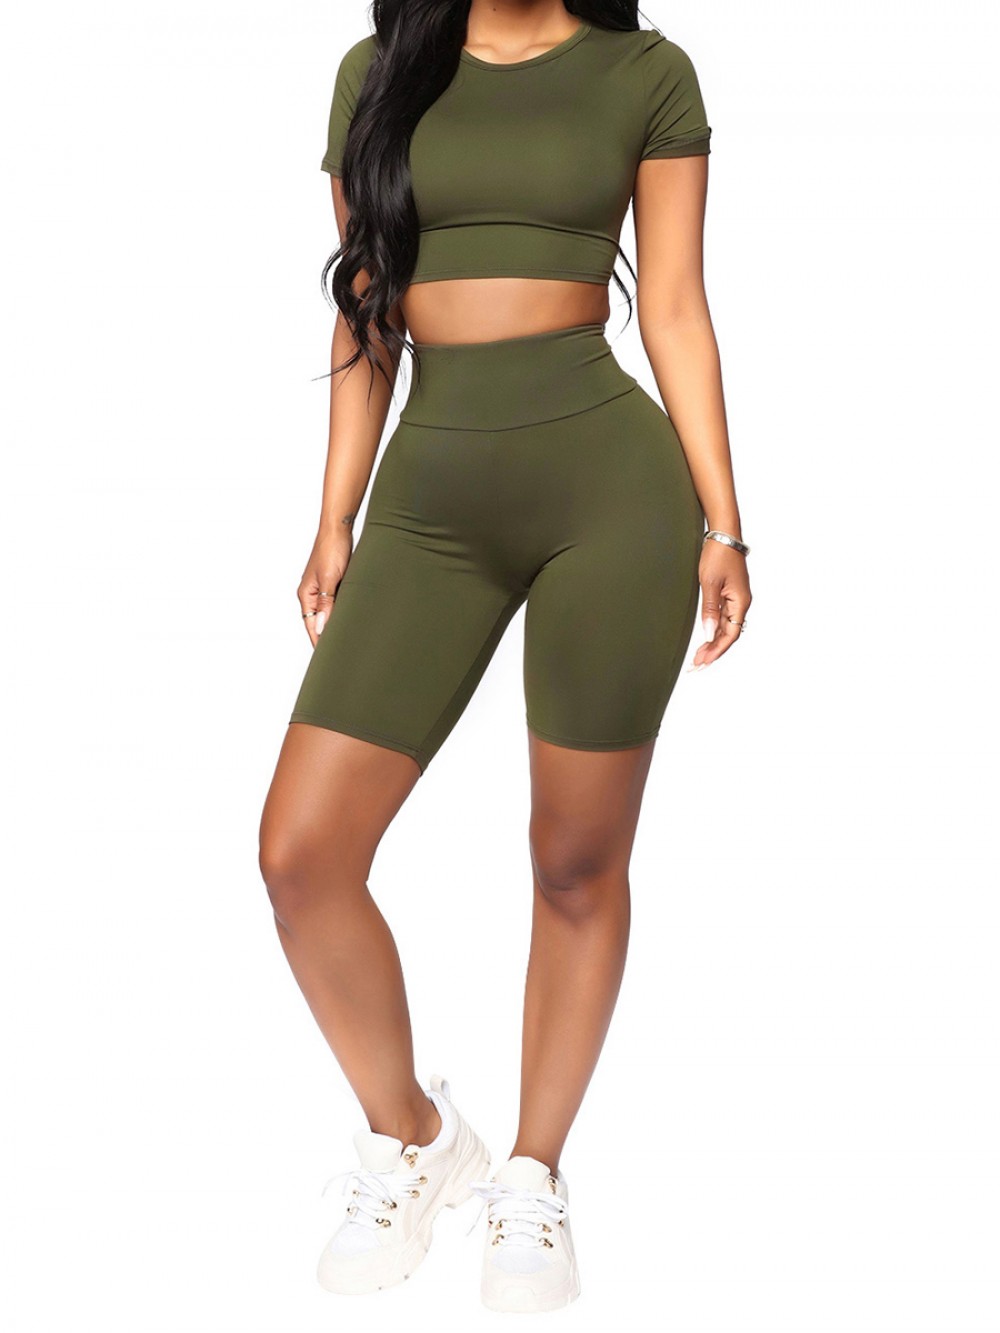 Chic Dark Green Short Sleeve Top Thigh Length Shorts For Lounging